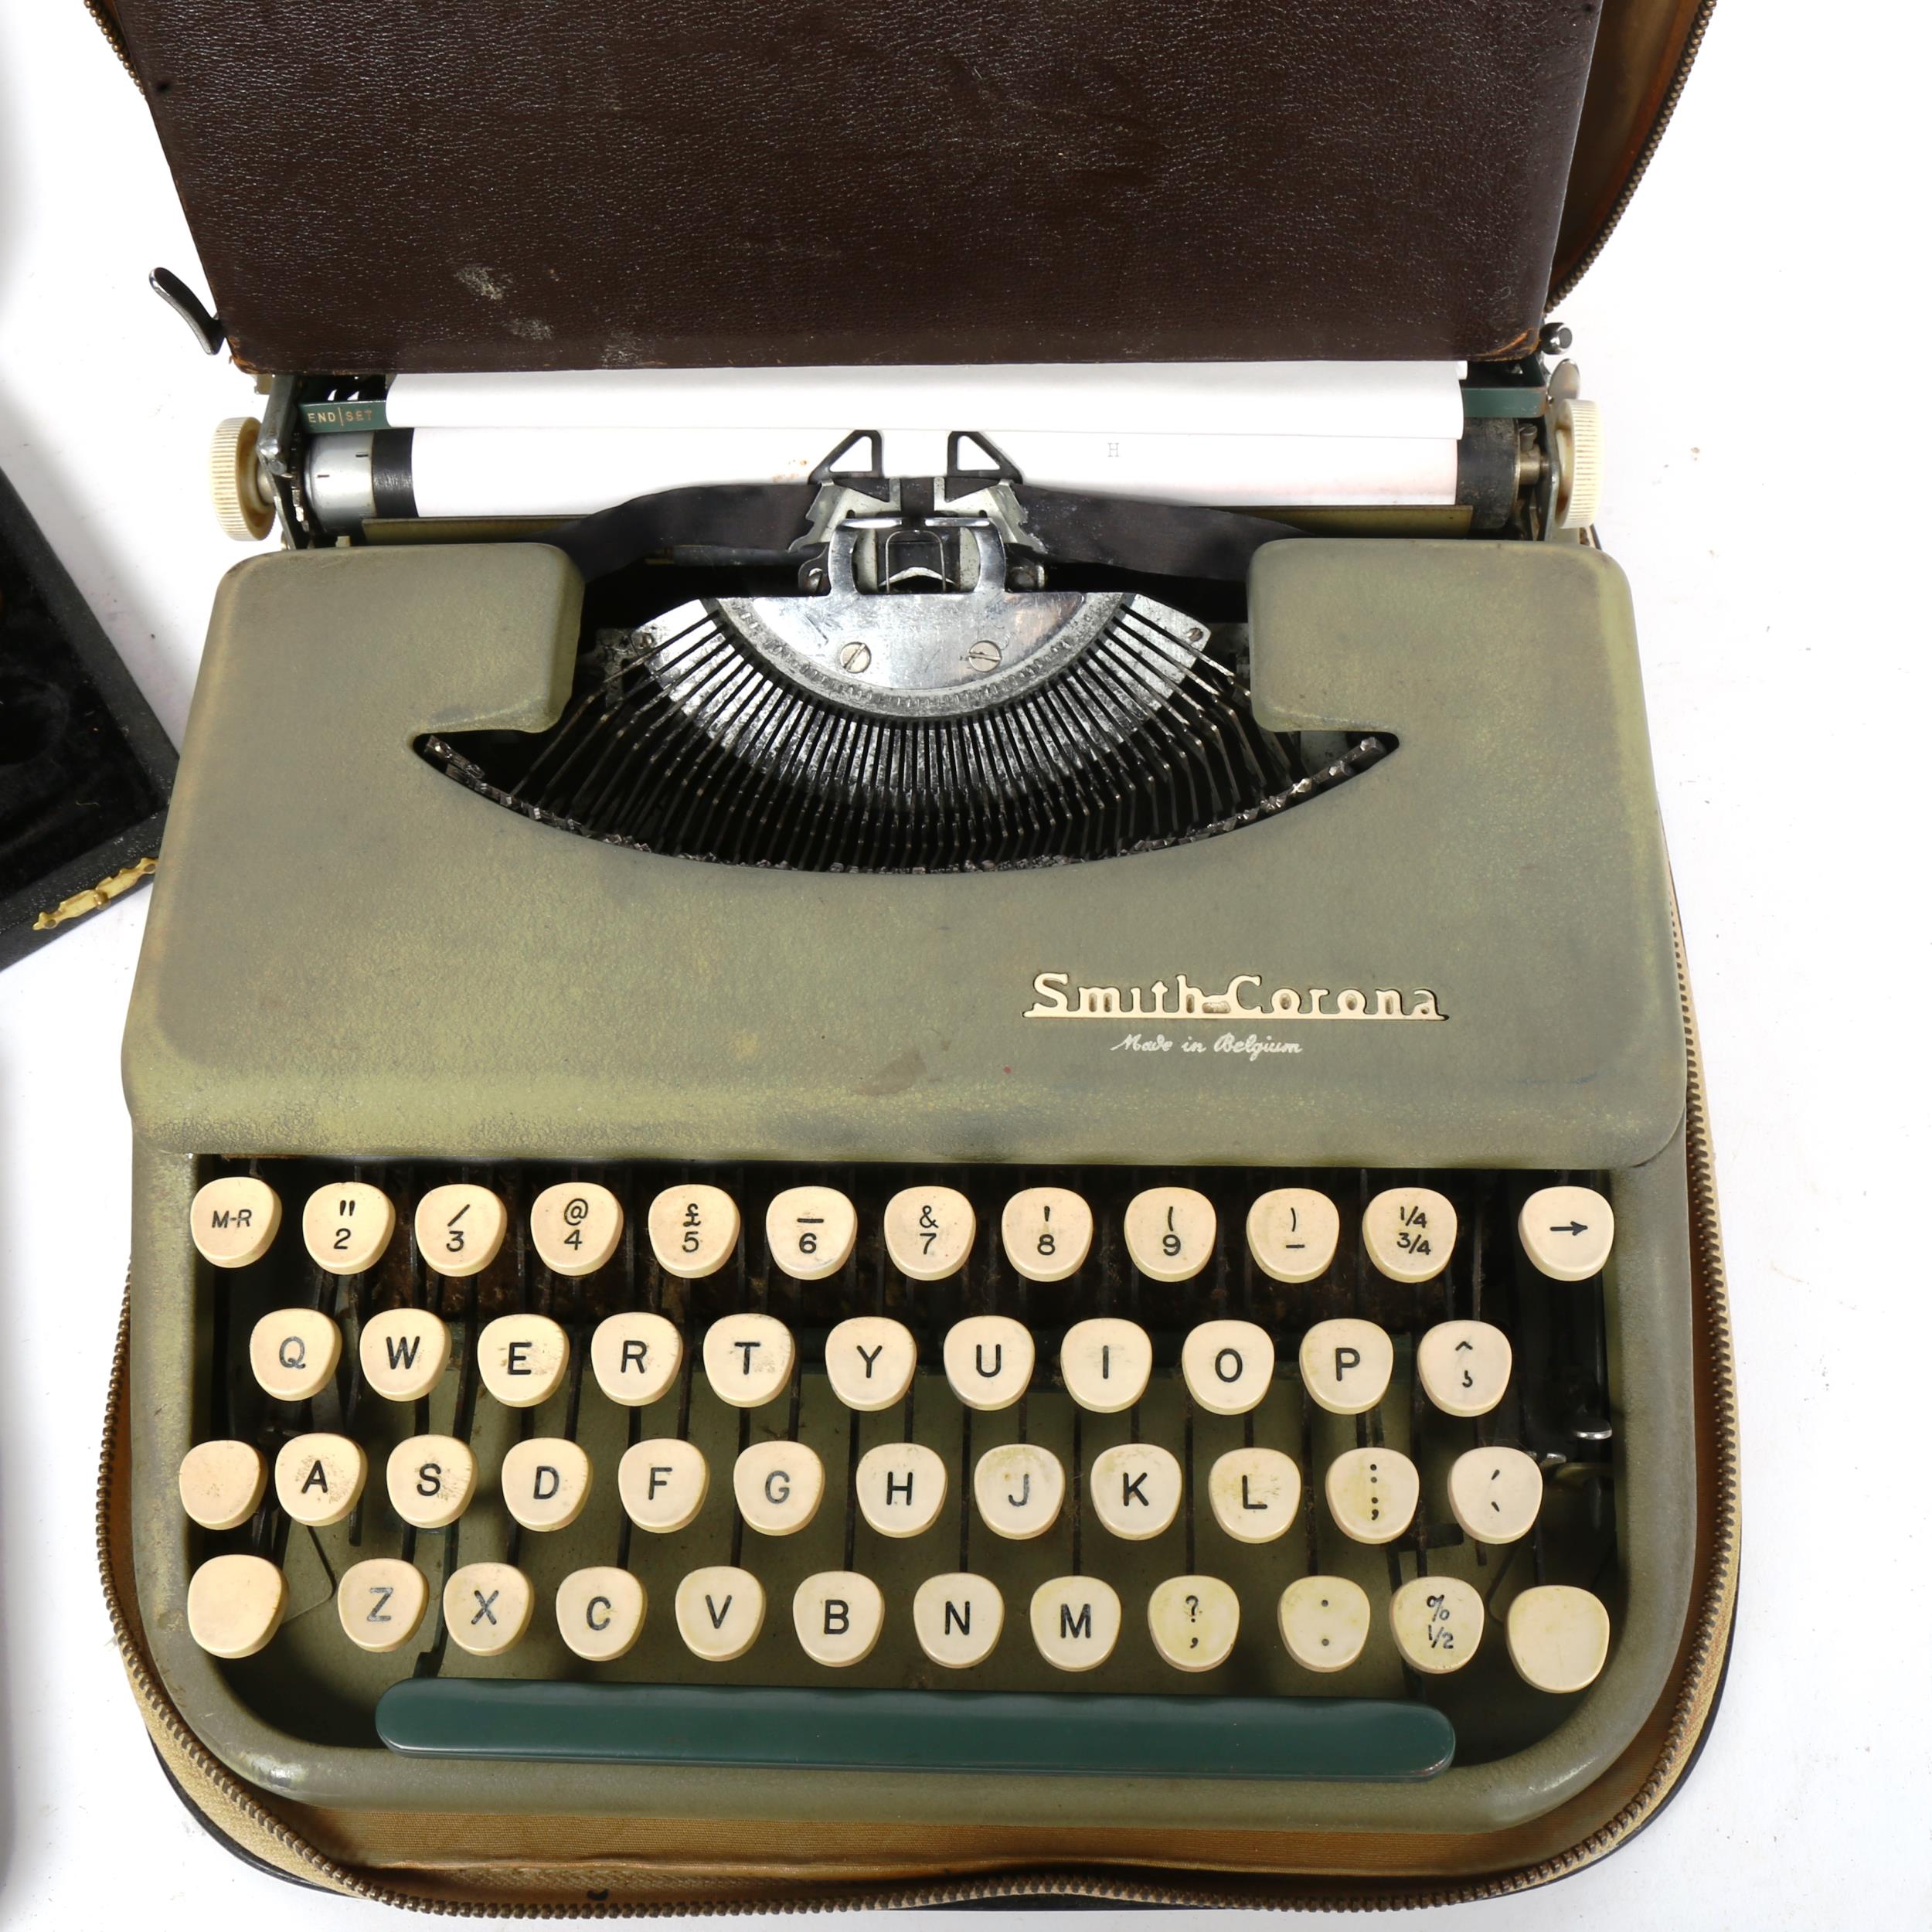 A Smith Corona portable typewriter, 2 scales and weights, and a leather jewel case with tray - Image 2 of 2